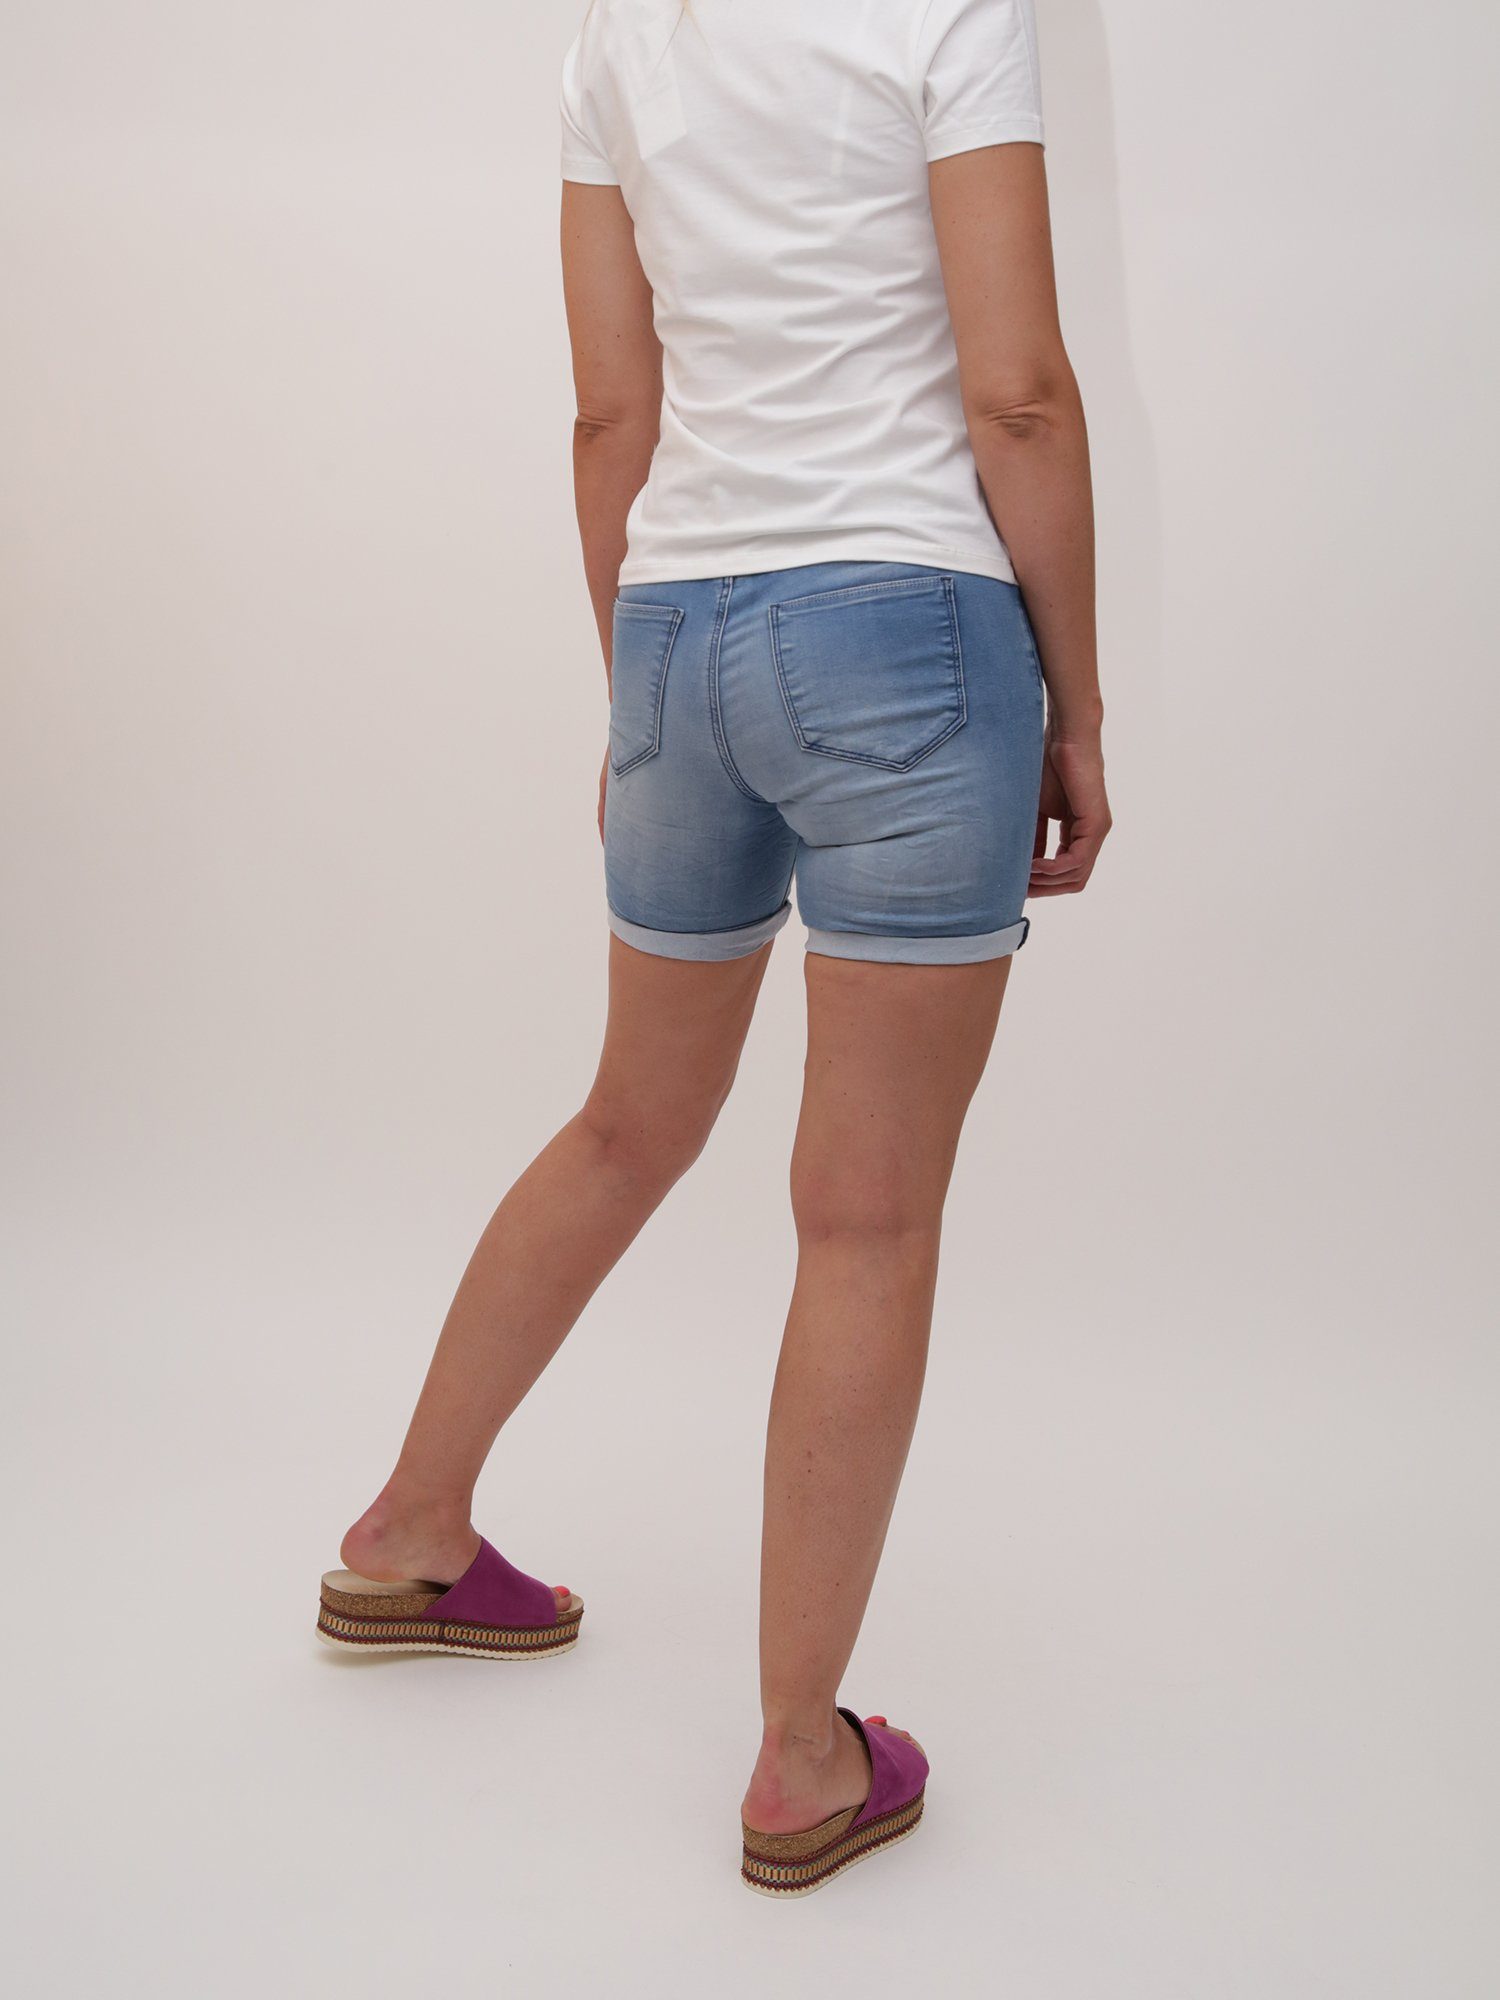 Blue Shorts Miracle Lucky Mid im of Denim Five-Pocket-Desig